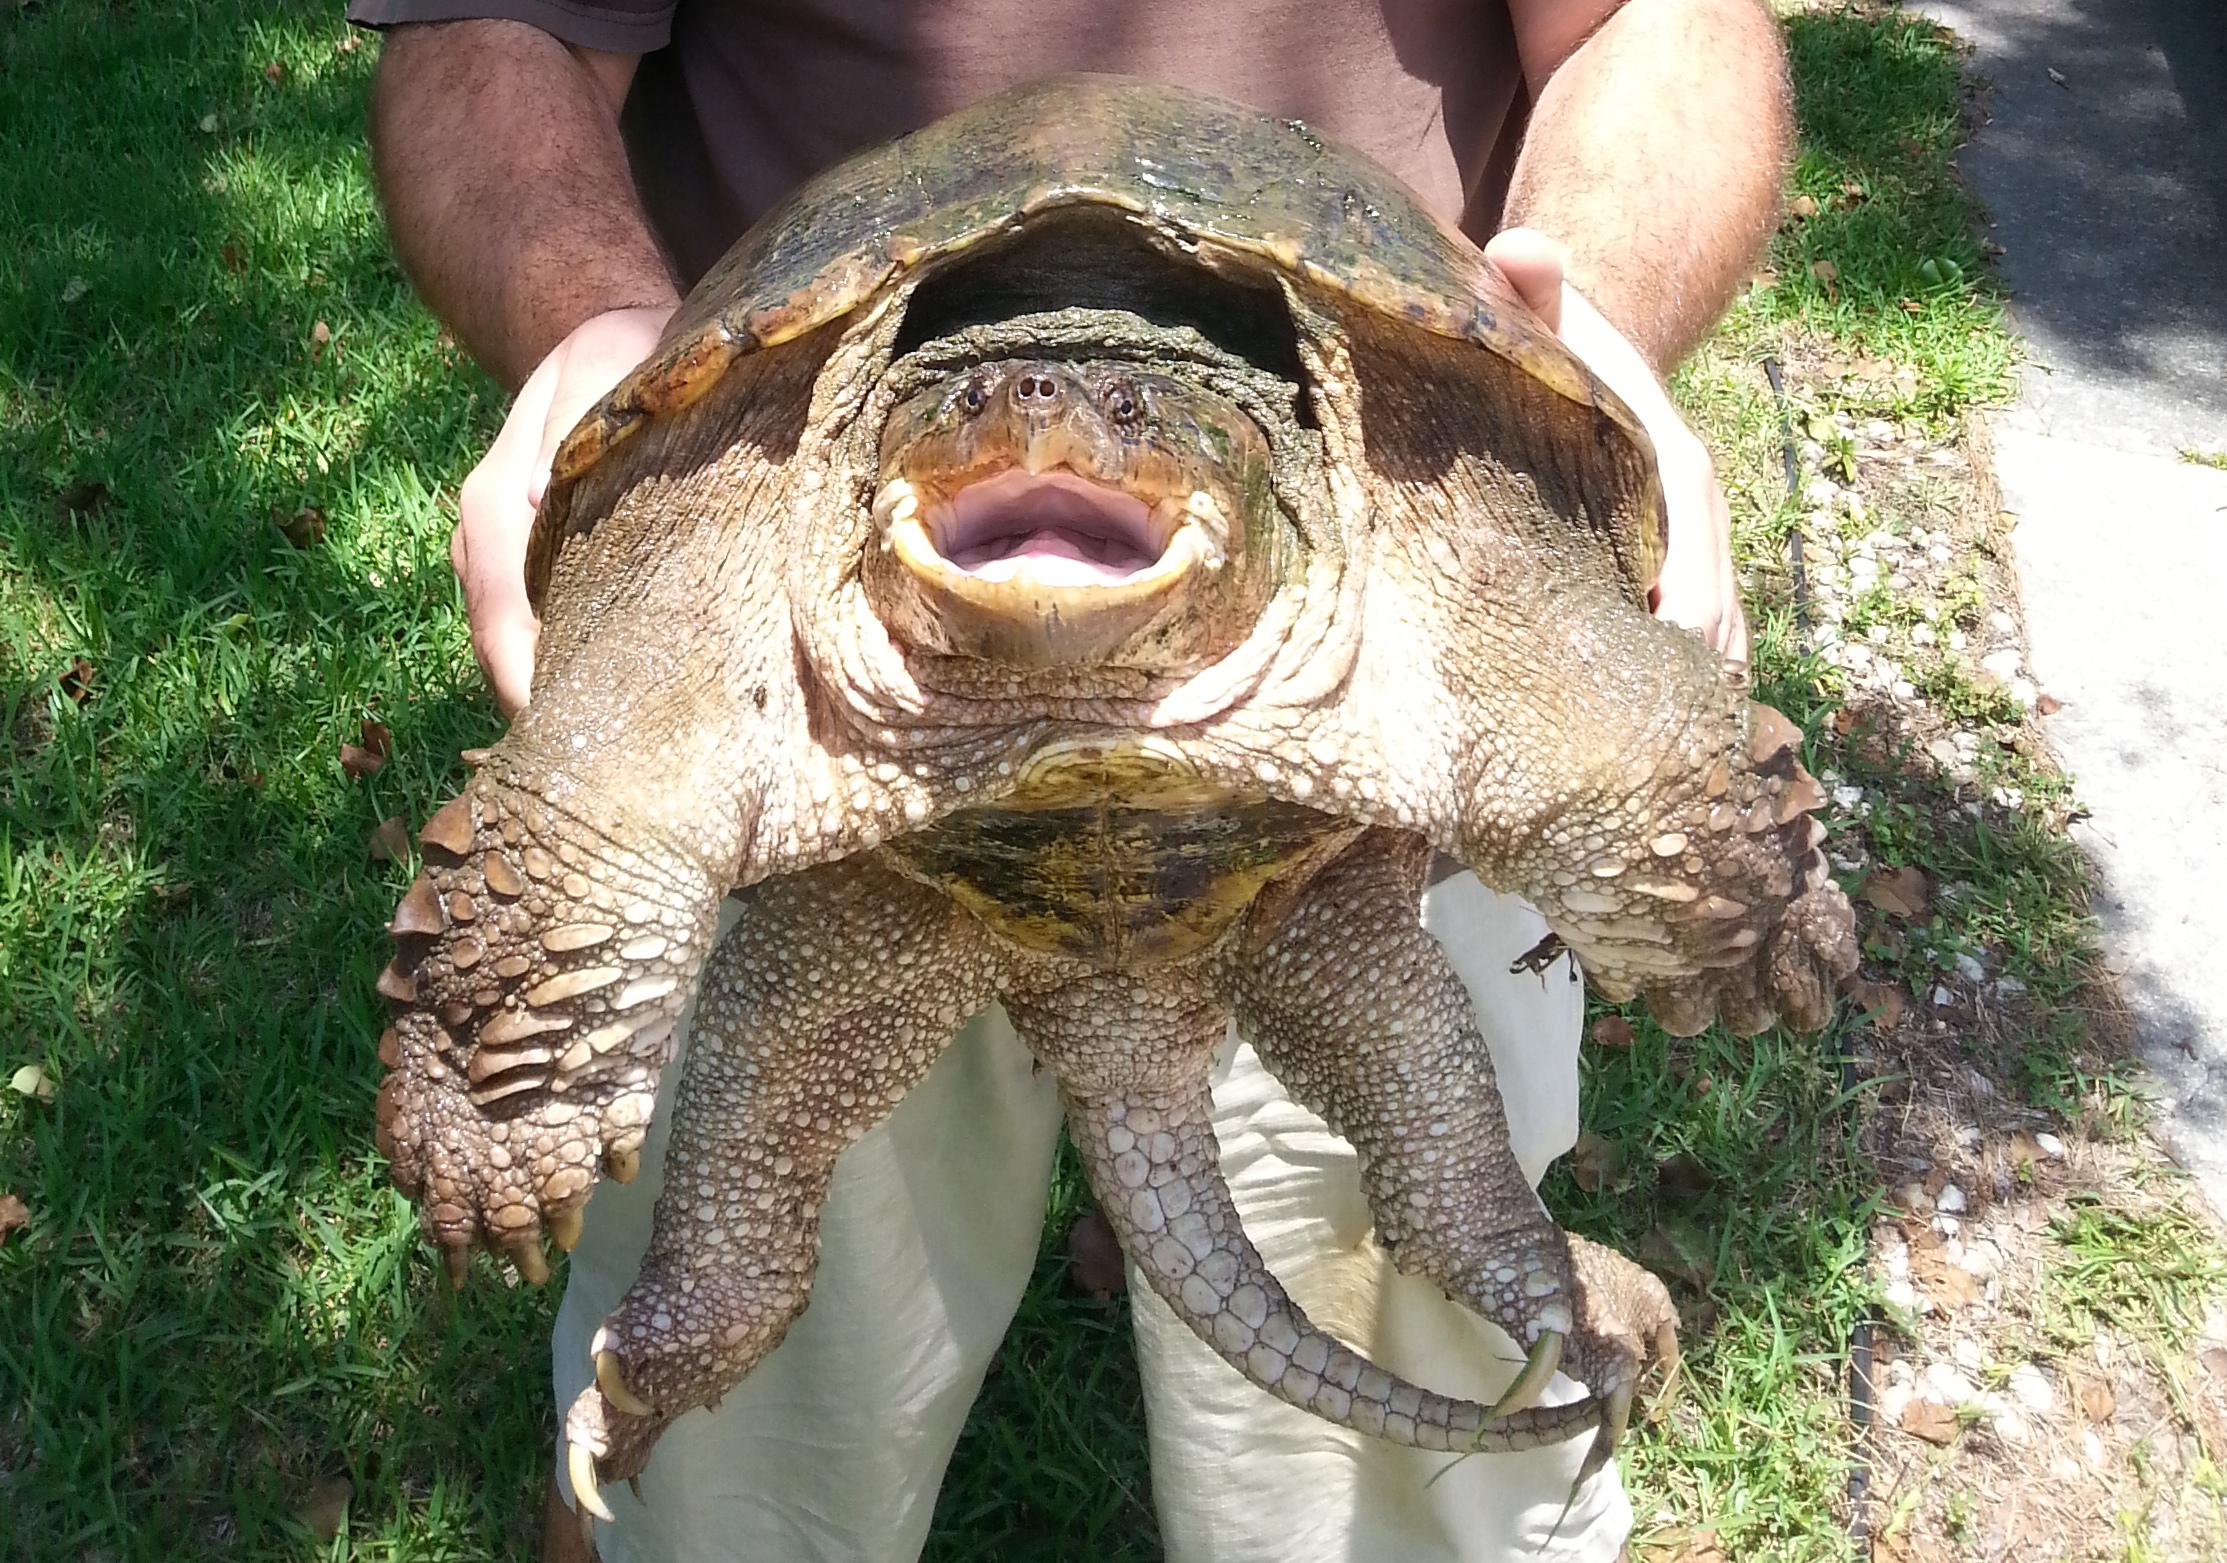 Large snapping turtle caught in Jette.